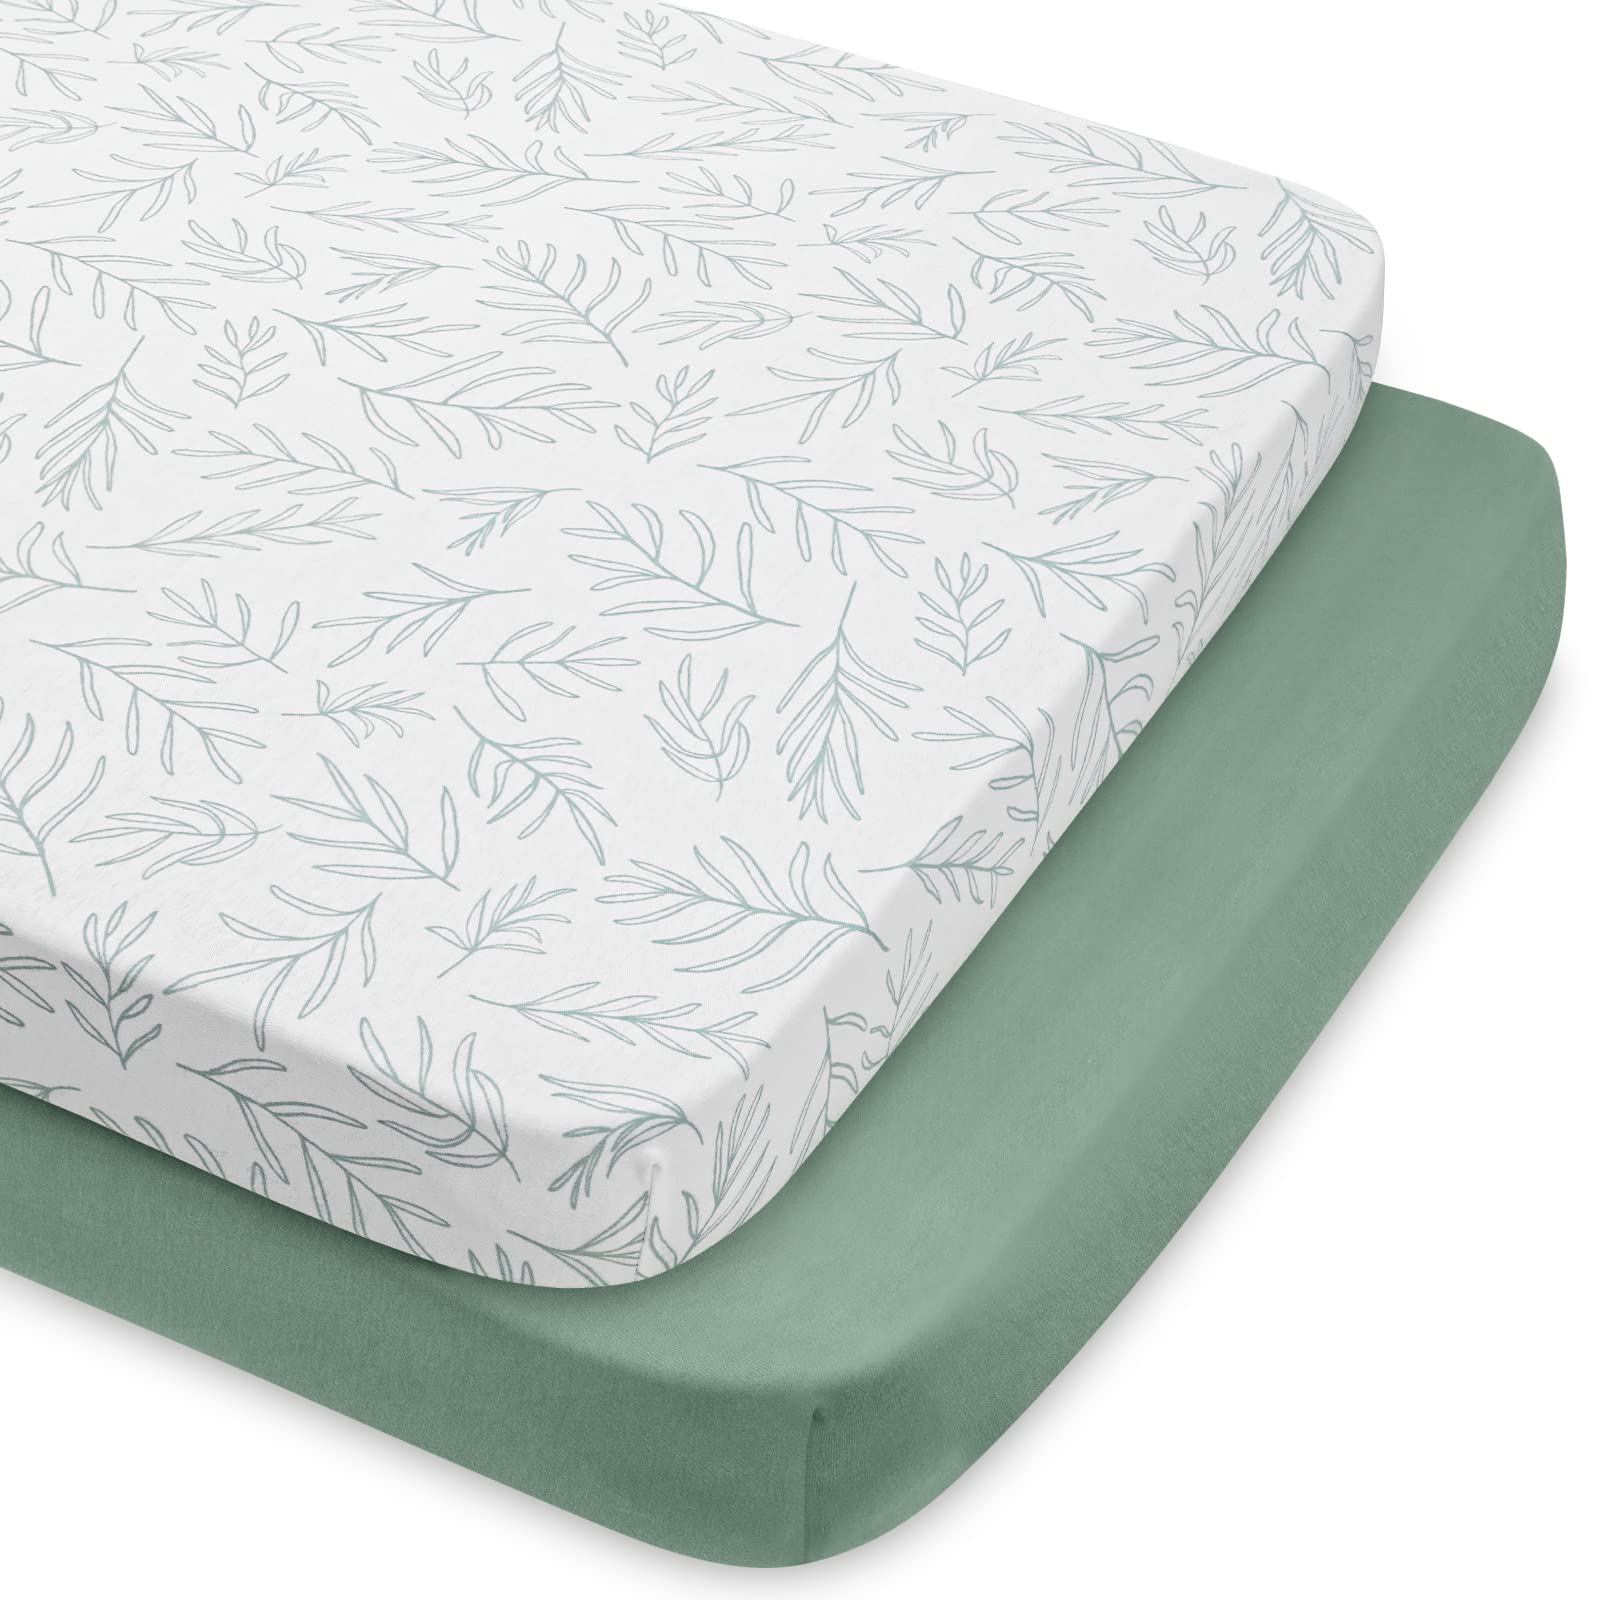 Babebay Pack N Play Sheets Fitted for Pack and Play Mattress and Mini Cribs, Jersey Knit Cotton for Natural Comfort Fitted for Baby Boys and Girls, Soft and Safe, 2 Pack (Sage Green)